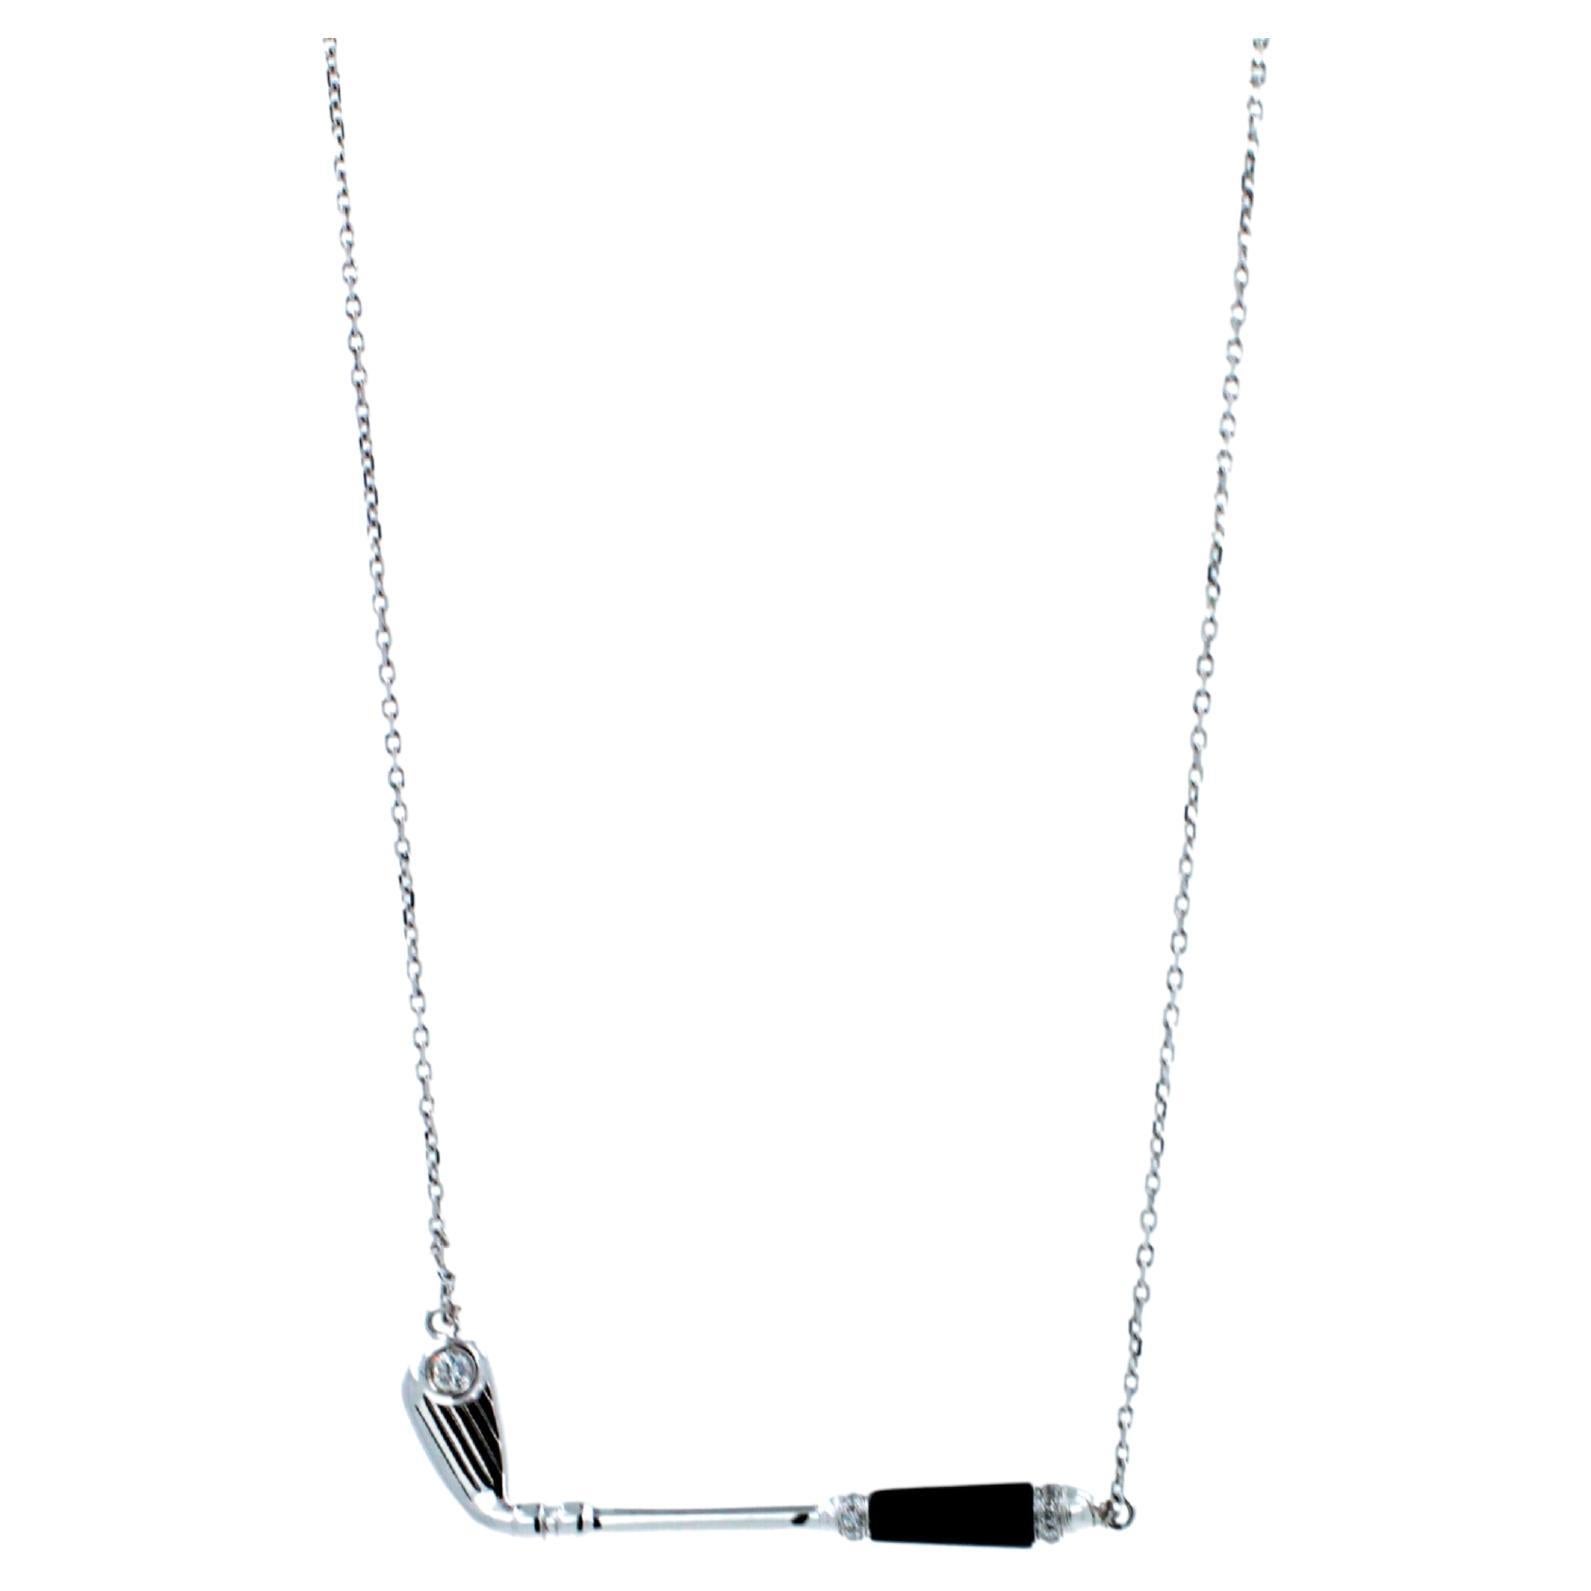 Diamond Black Onyx Golf Club Birdie Charm 18K White Gold Necklace Pendant Symbol
18K White Gold
Black Onyx Gemstone Handle
White Diamond Golf Ball Gemstone
0.15 cts Diamonds
16-18 inches Diamond-Cut Link Cable chain length
In-Stock
This is part of